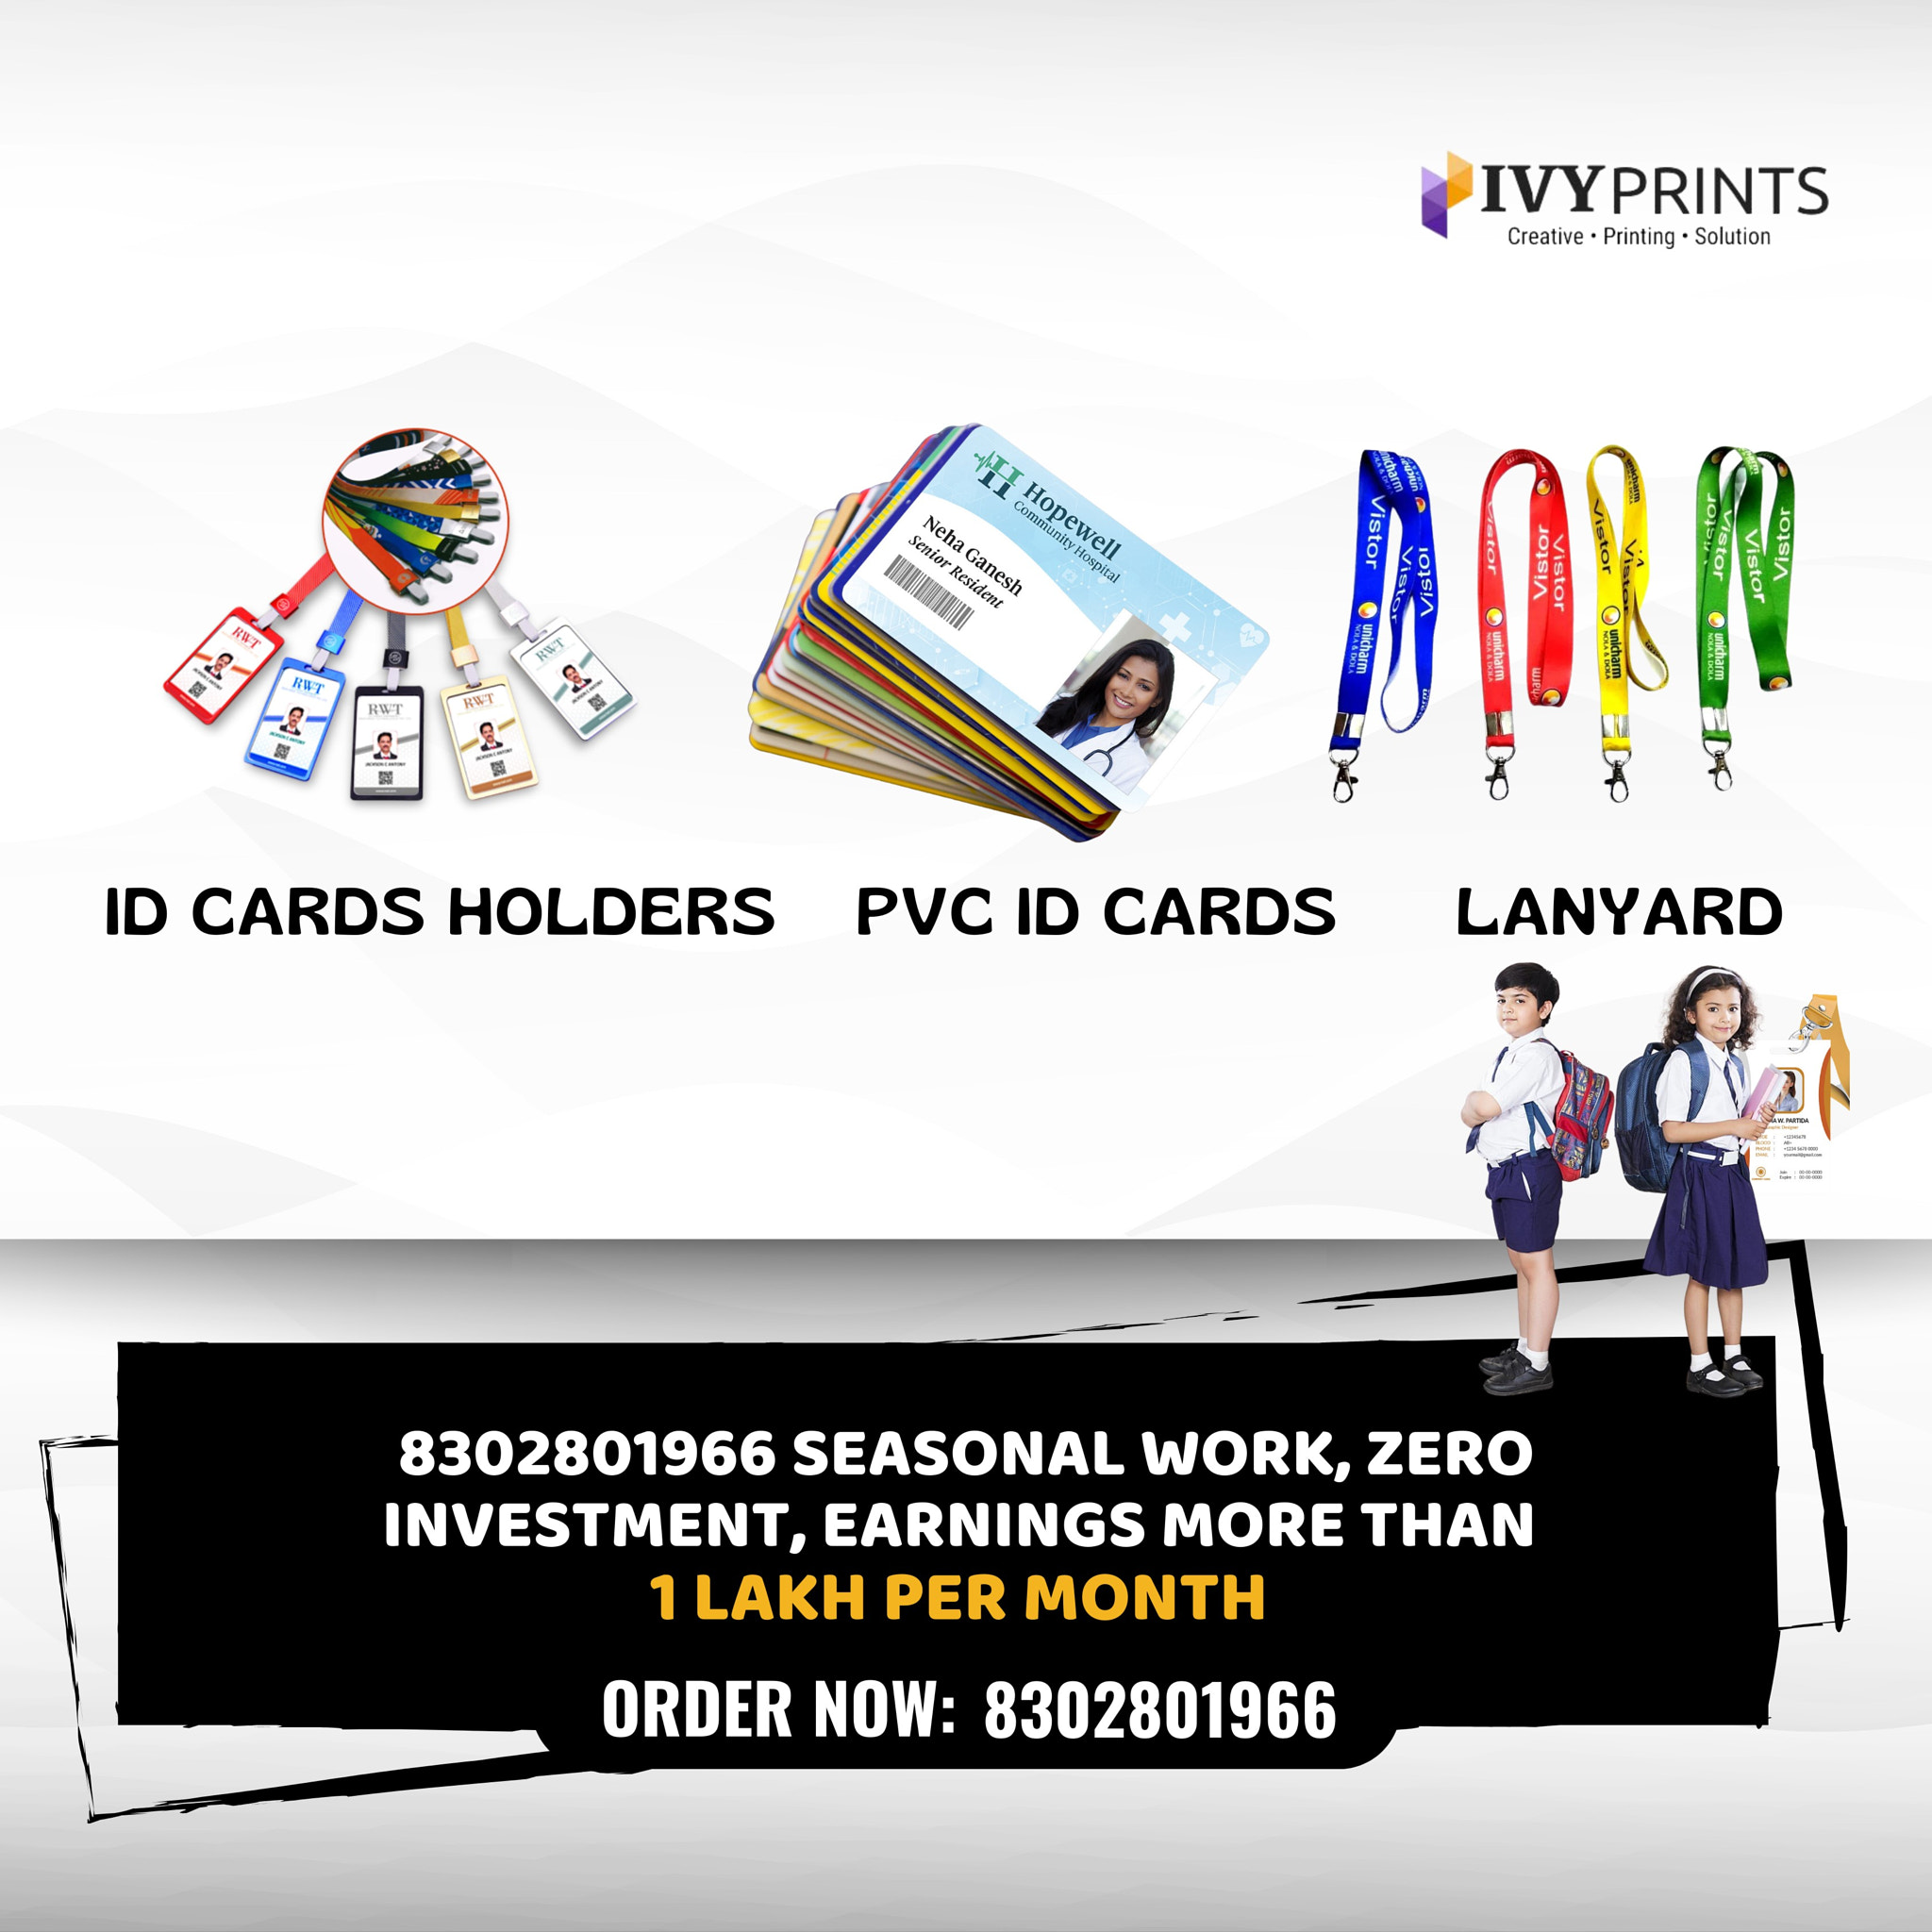 IVY Prints: A reliable and experienced PVC ID card printing company in Jaipur